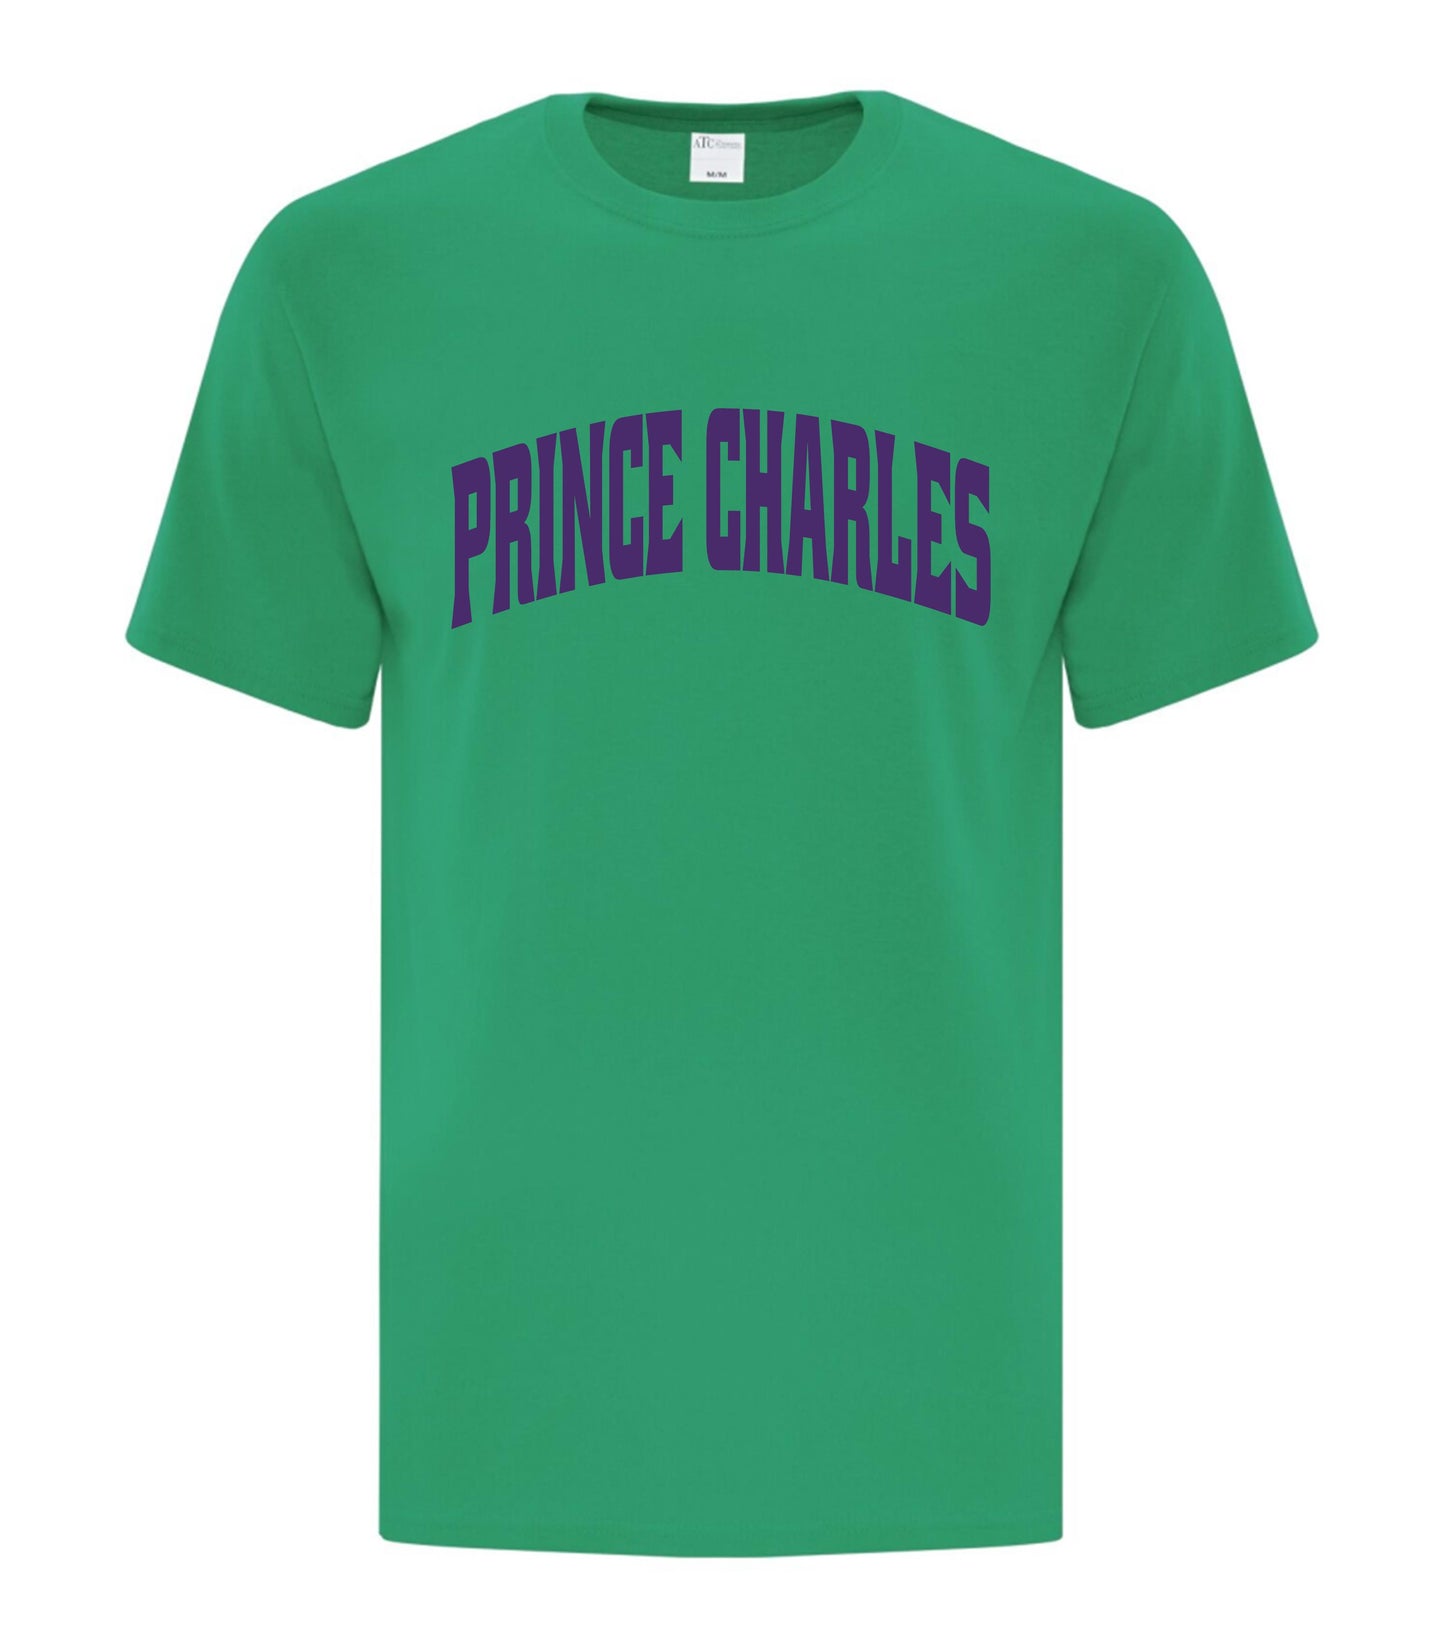 Prince Charles Chargers Youth Cotton Spirit Wear T-Shirt Name Logo